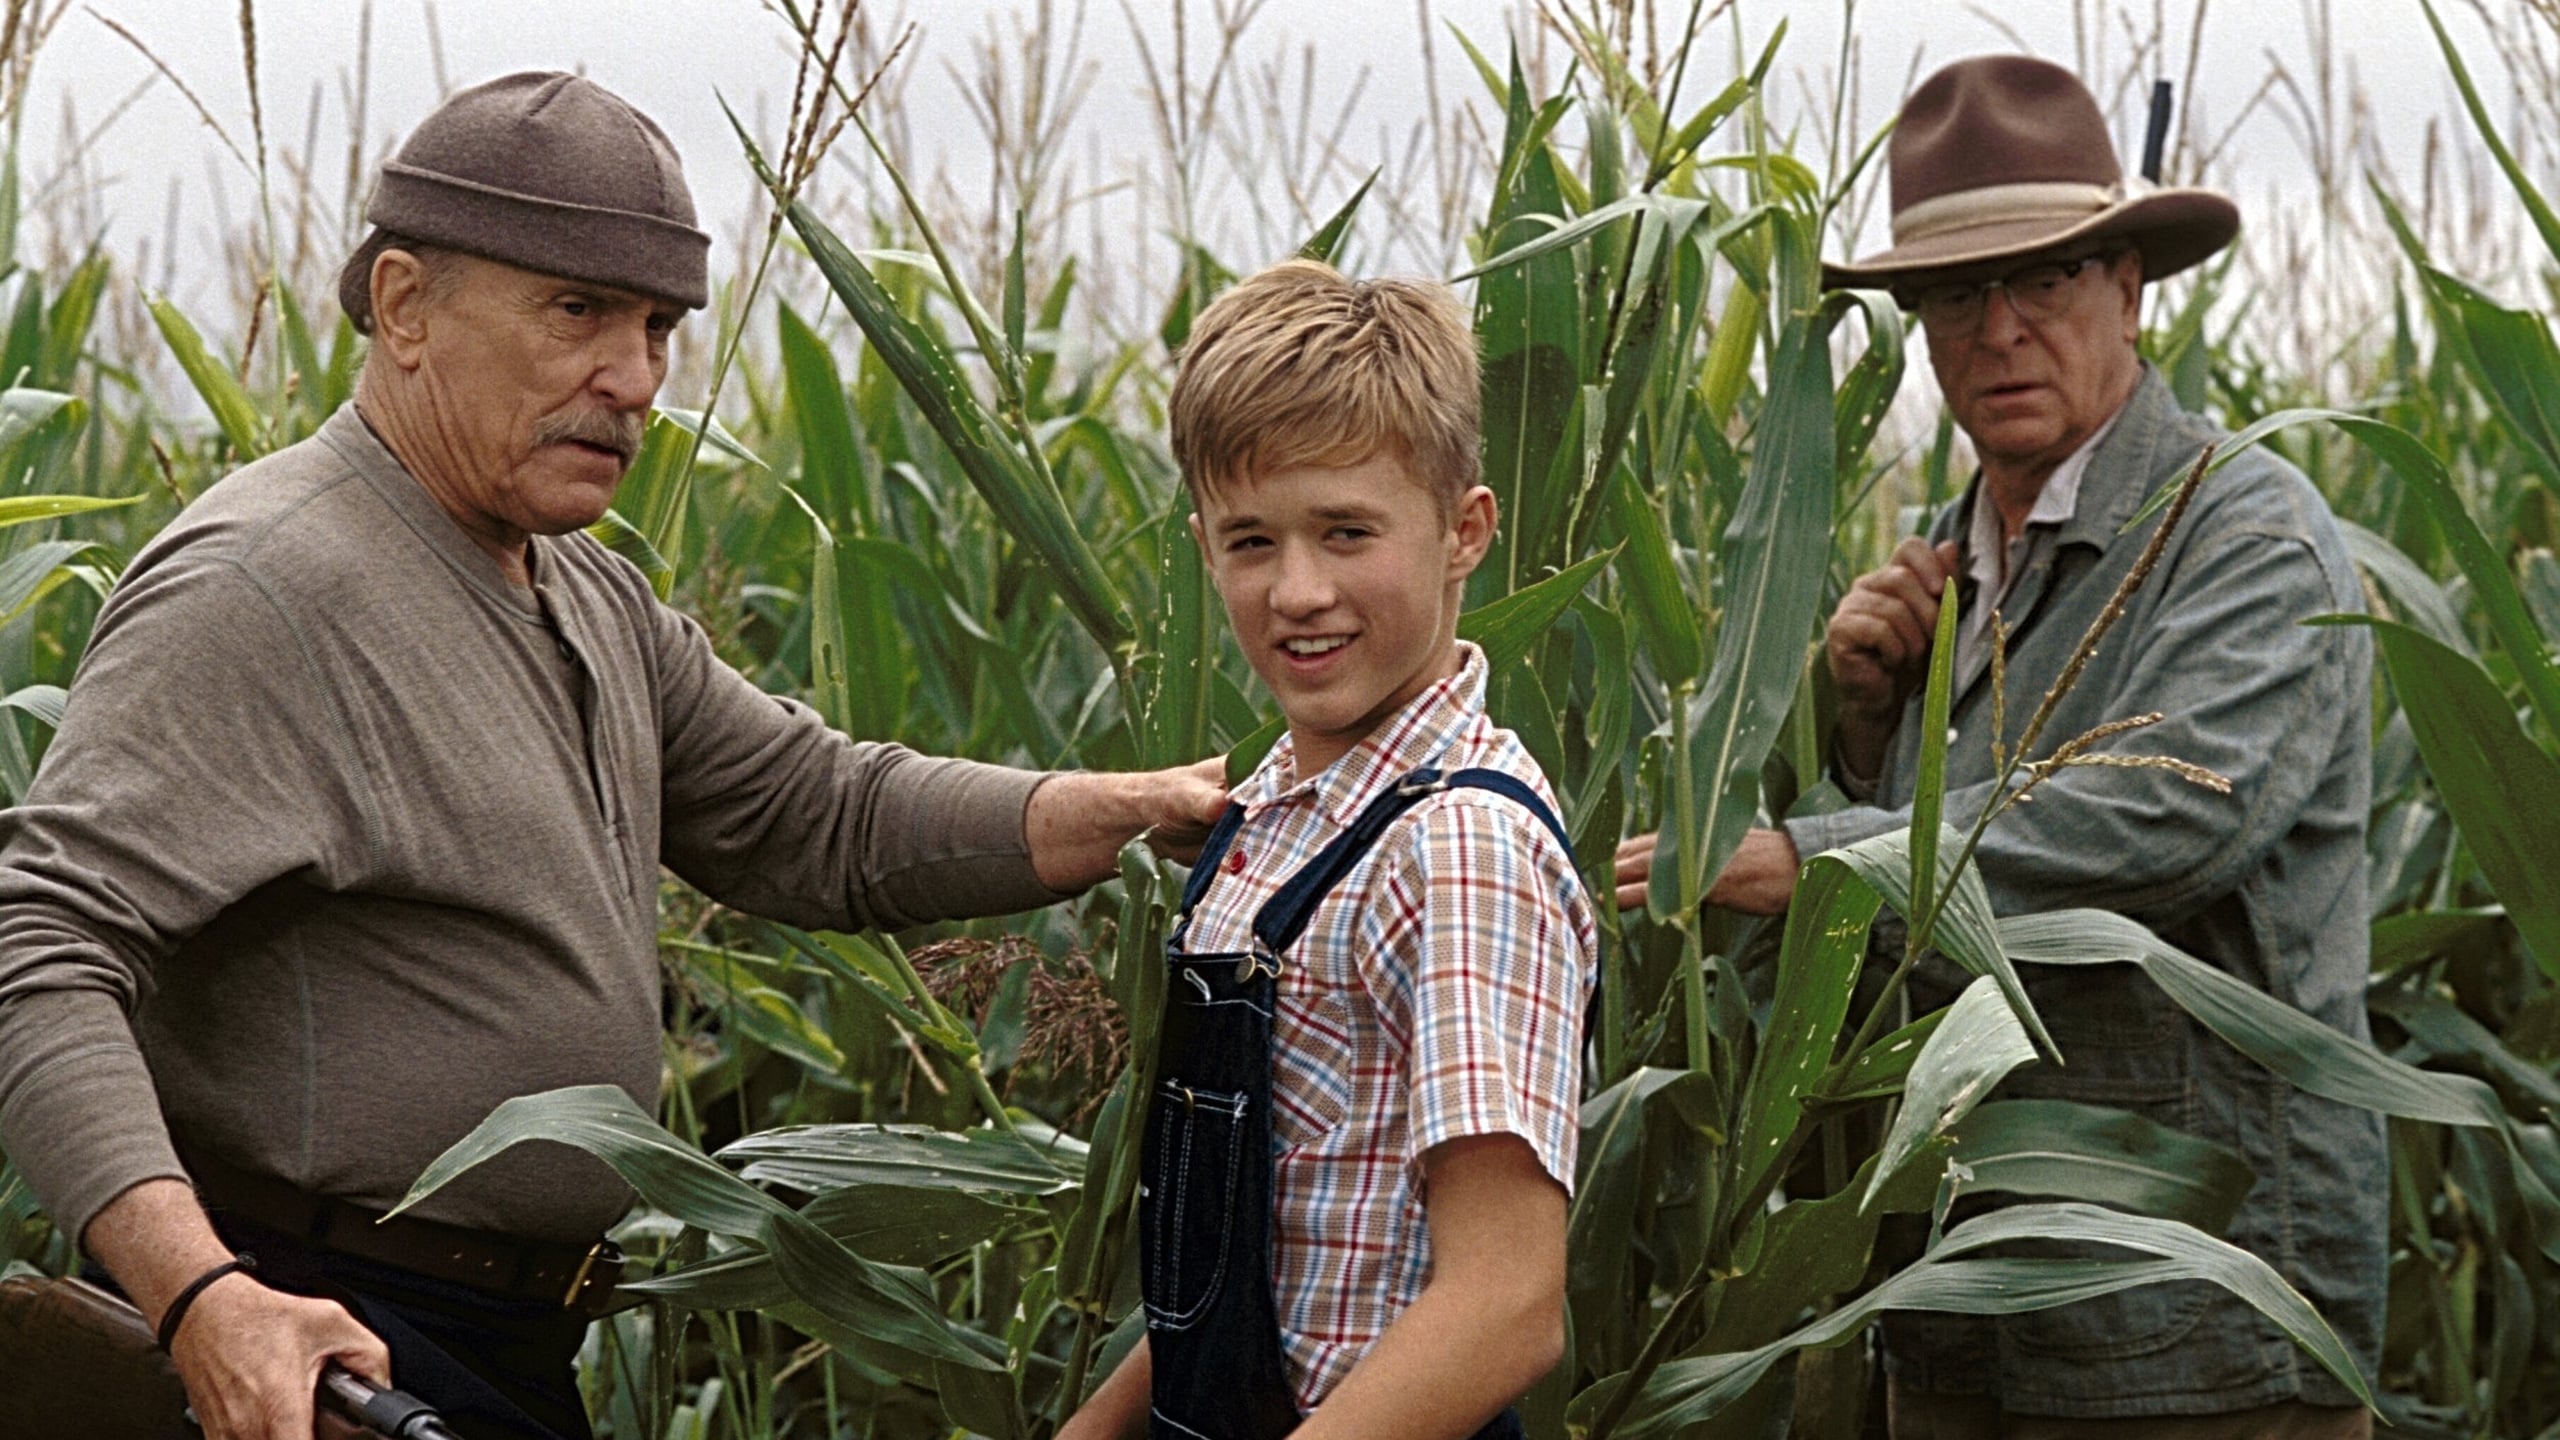 Secondhand Lions 2003 123movies